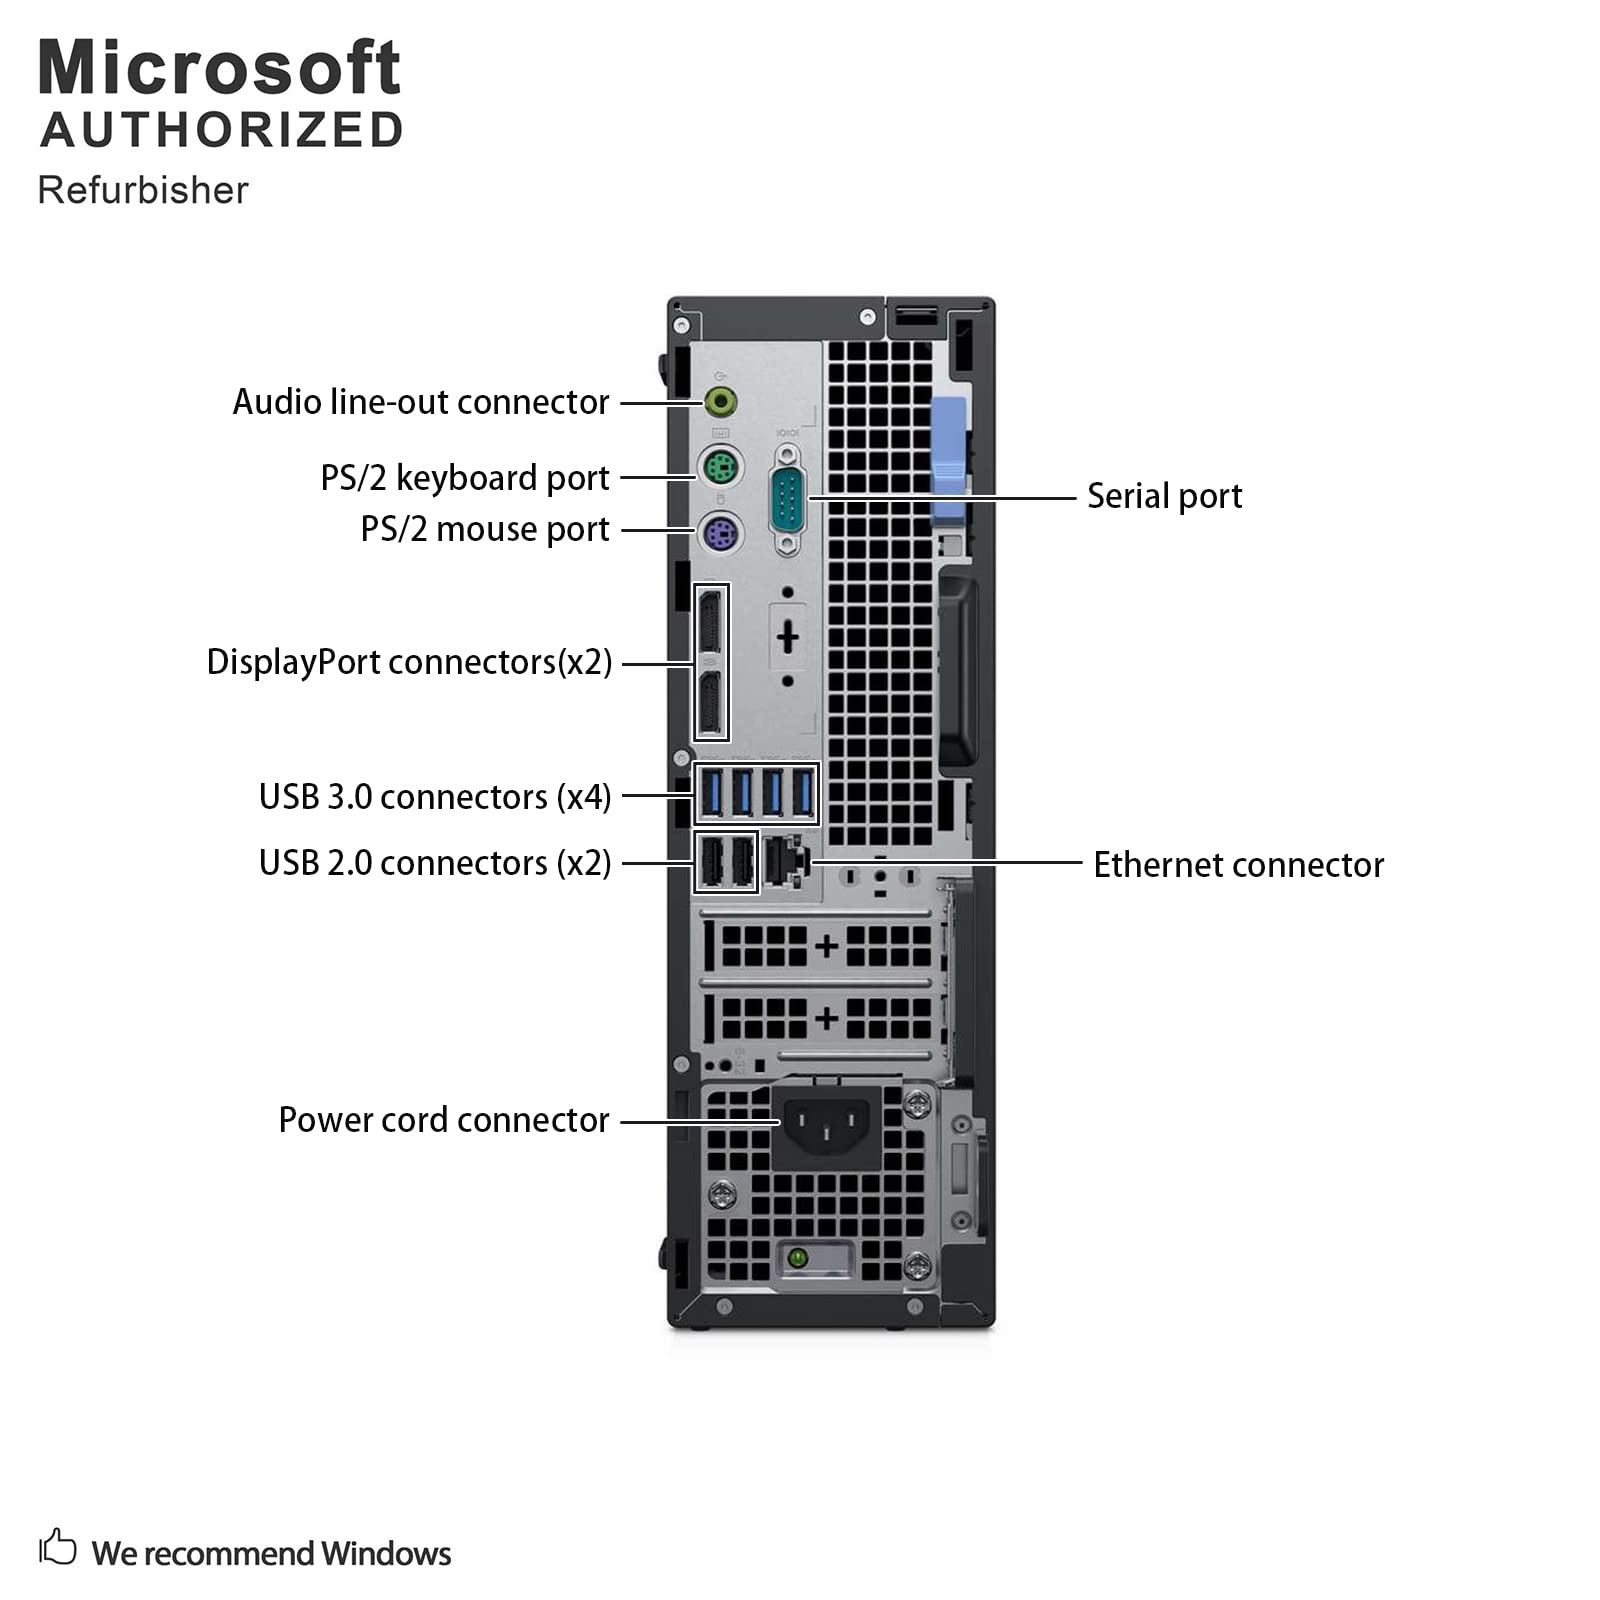 Dell OptiPlex 7070 SFF High Performance Desktop Computer, Intel Eight Core i7-9700 up to 4.7GHz, 16G DDR4, 512G SSD, WiFi, BT, 4K Support, DP, HDMI, Win 10 Pro 64 English/Spanish/French(Renewed)